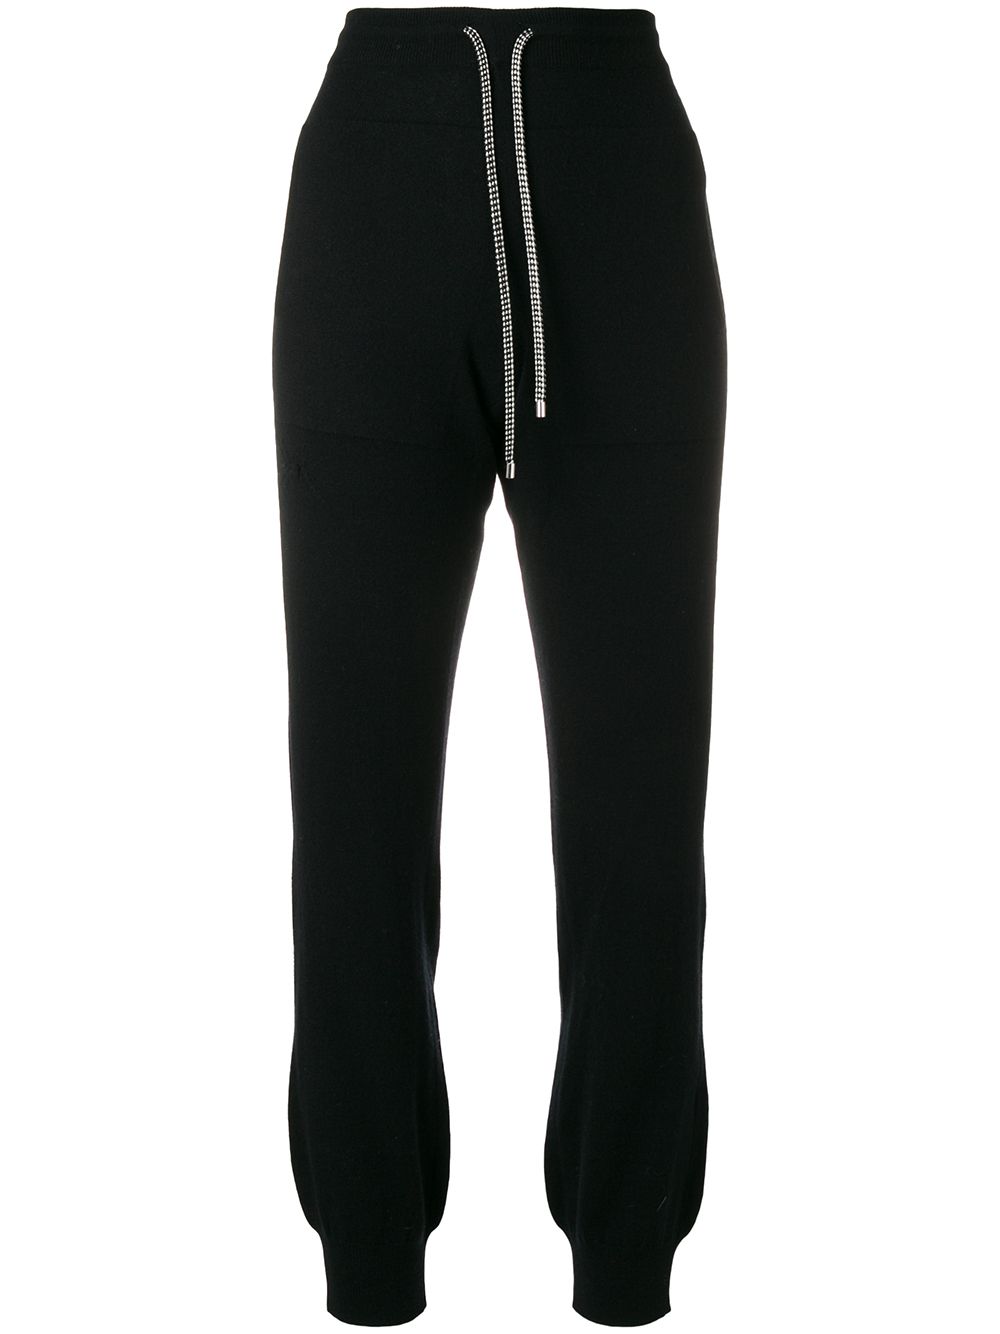 Barrie Romantic Timeless cashmere jogging trousers - Black von Barrie